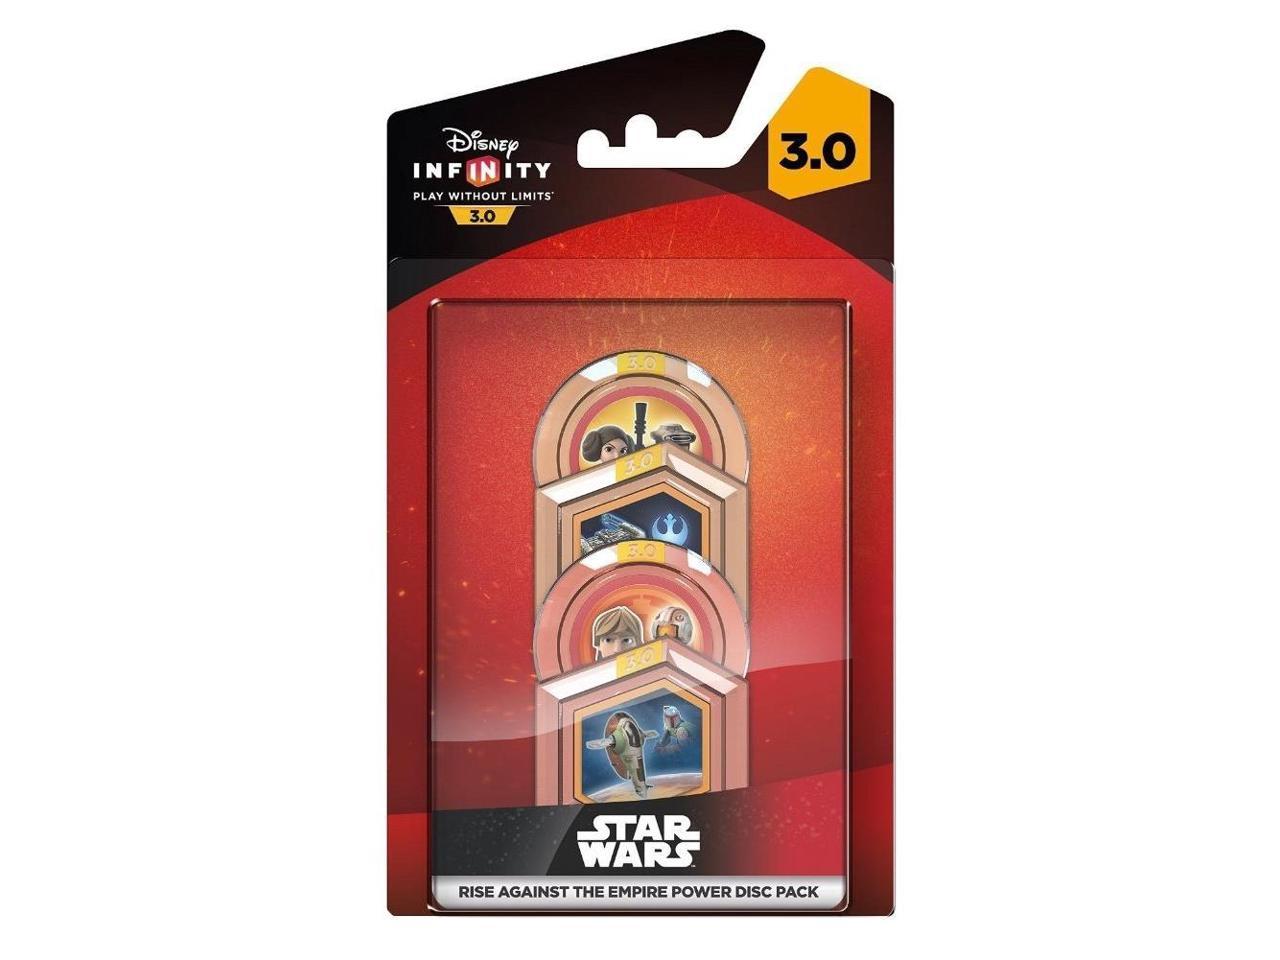 Disney Infinity 3.0 Edition: Star Wars Rise Against the Empire Power Disc Pack - image 3 of 4